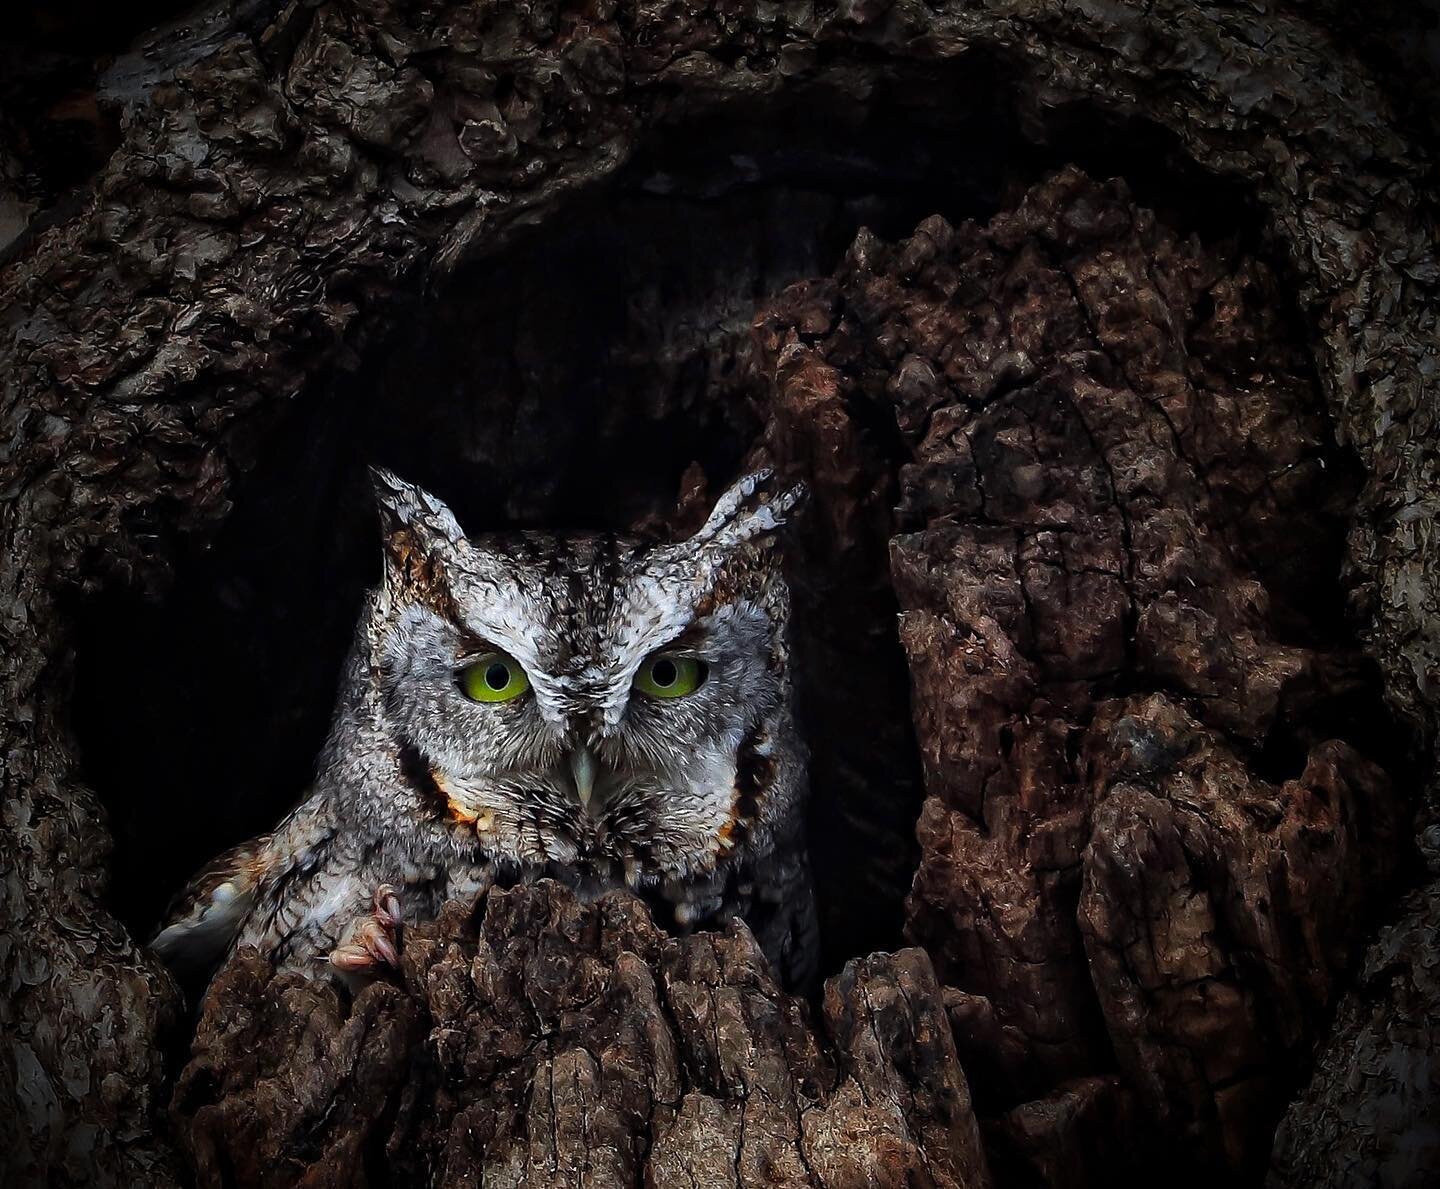 🎈34 🎈 
➖➖➖
I have been sitting on this photo for a year, marking it as one of the best experiences of my life in the natural world thus far. This Eastern Screech Owl fought off a squirrel, then stared directly at me for 15 minutes. He preened and y